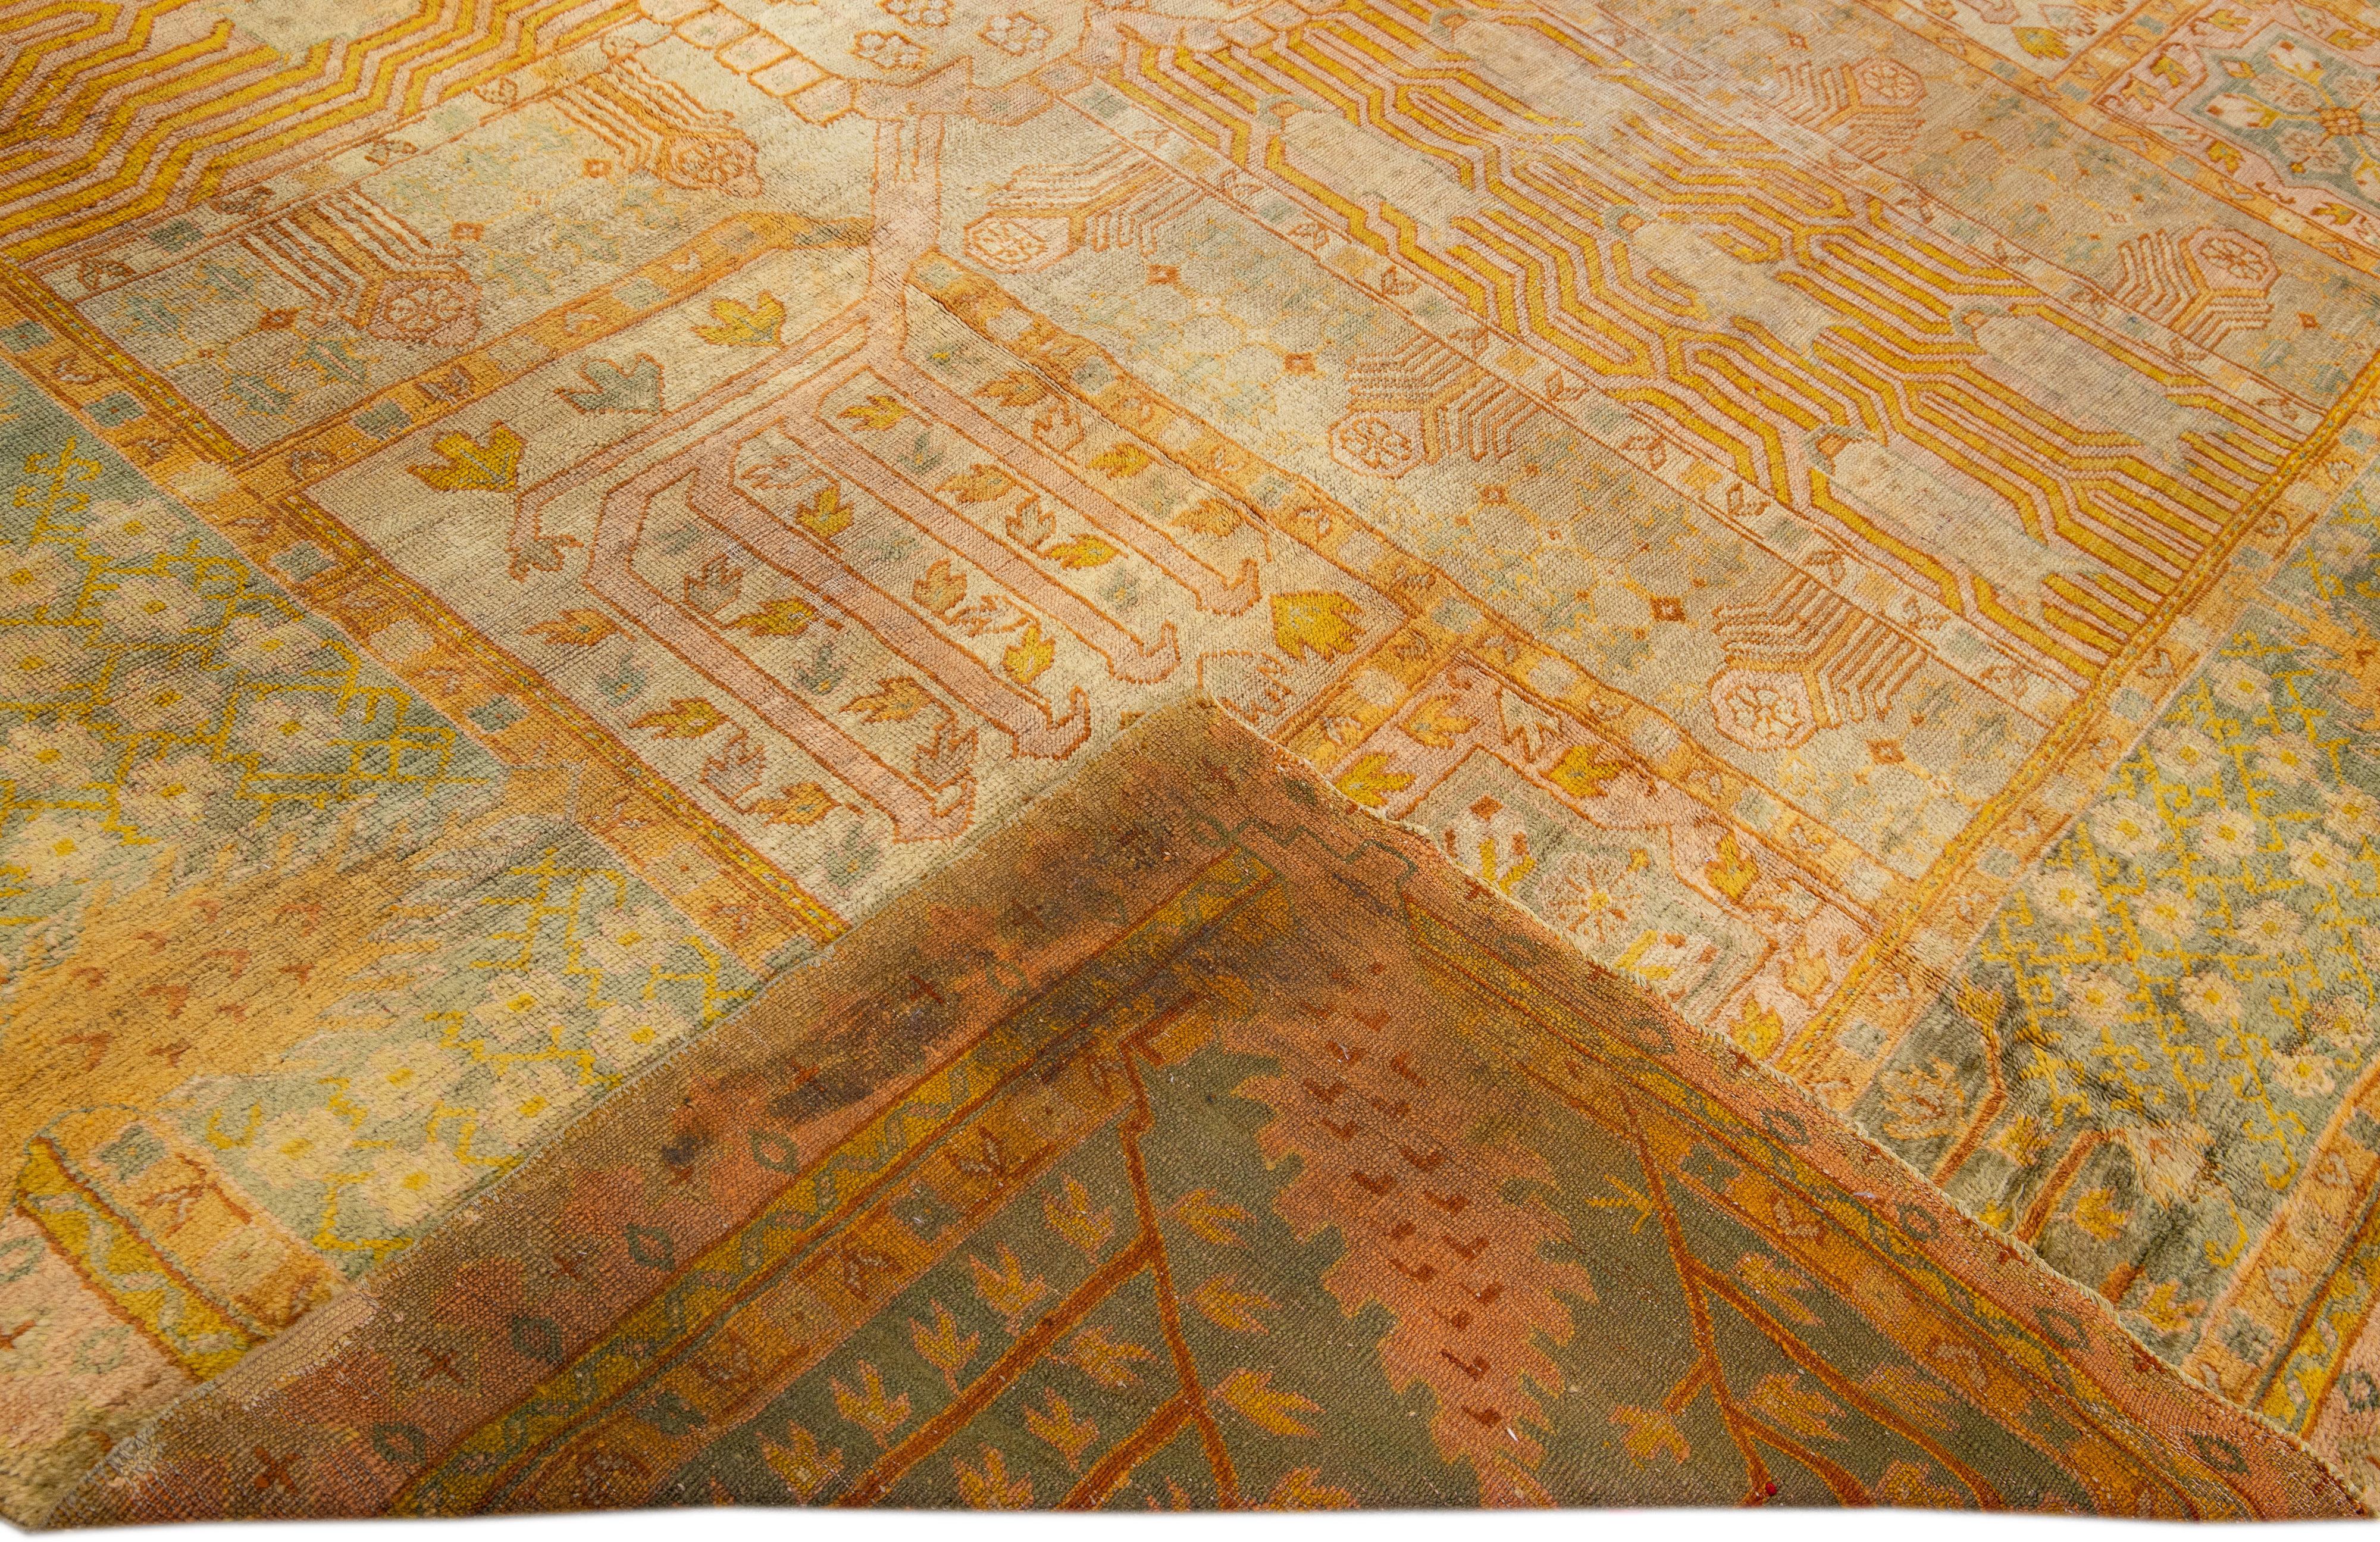 Beautiful Vintage Turkish hand-knotted wool rug with a Tan field. This rug has a designed green frame with accents of goldenrod and brown in a gorgeous all-over geometric floral design.

This rug measures: 11'10